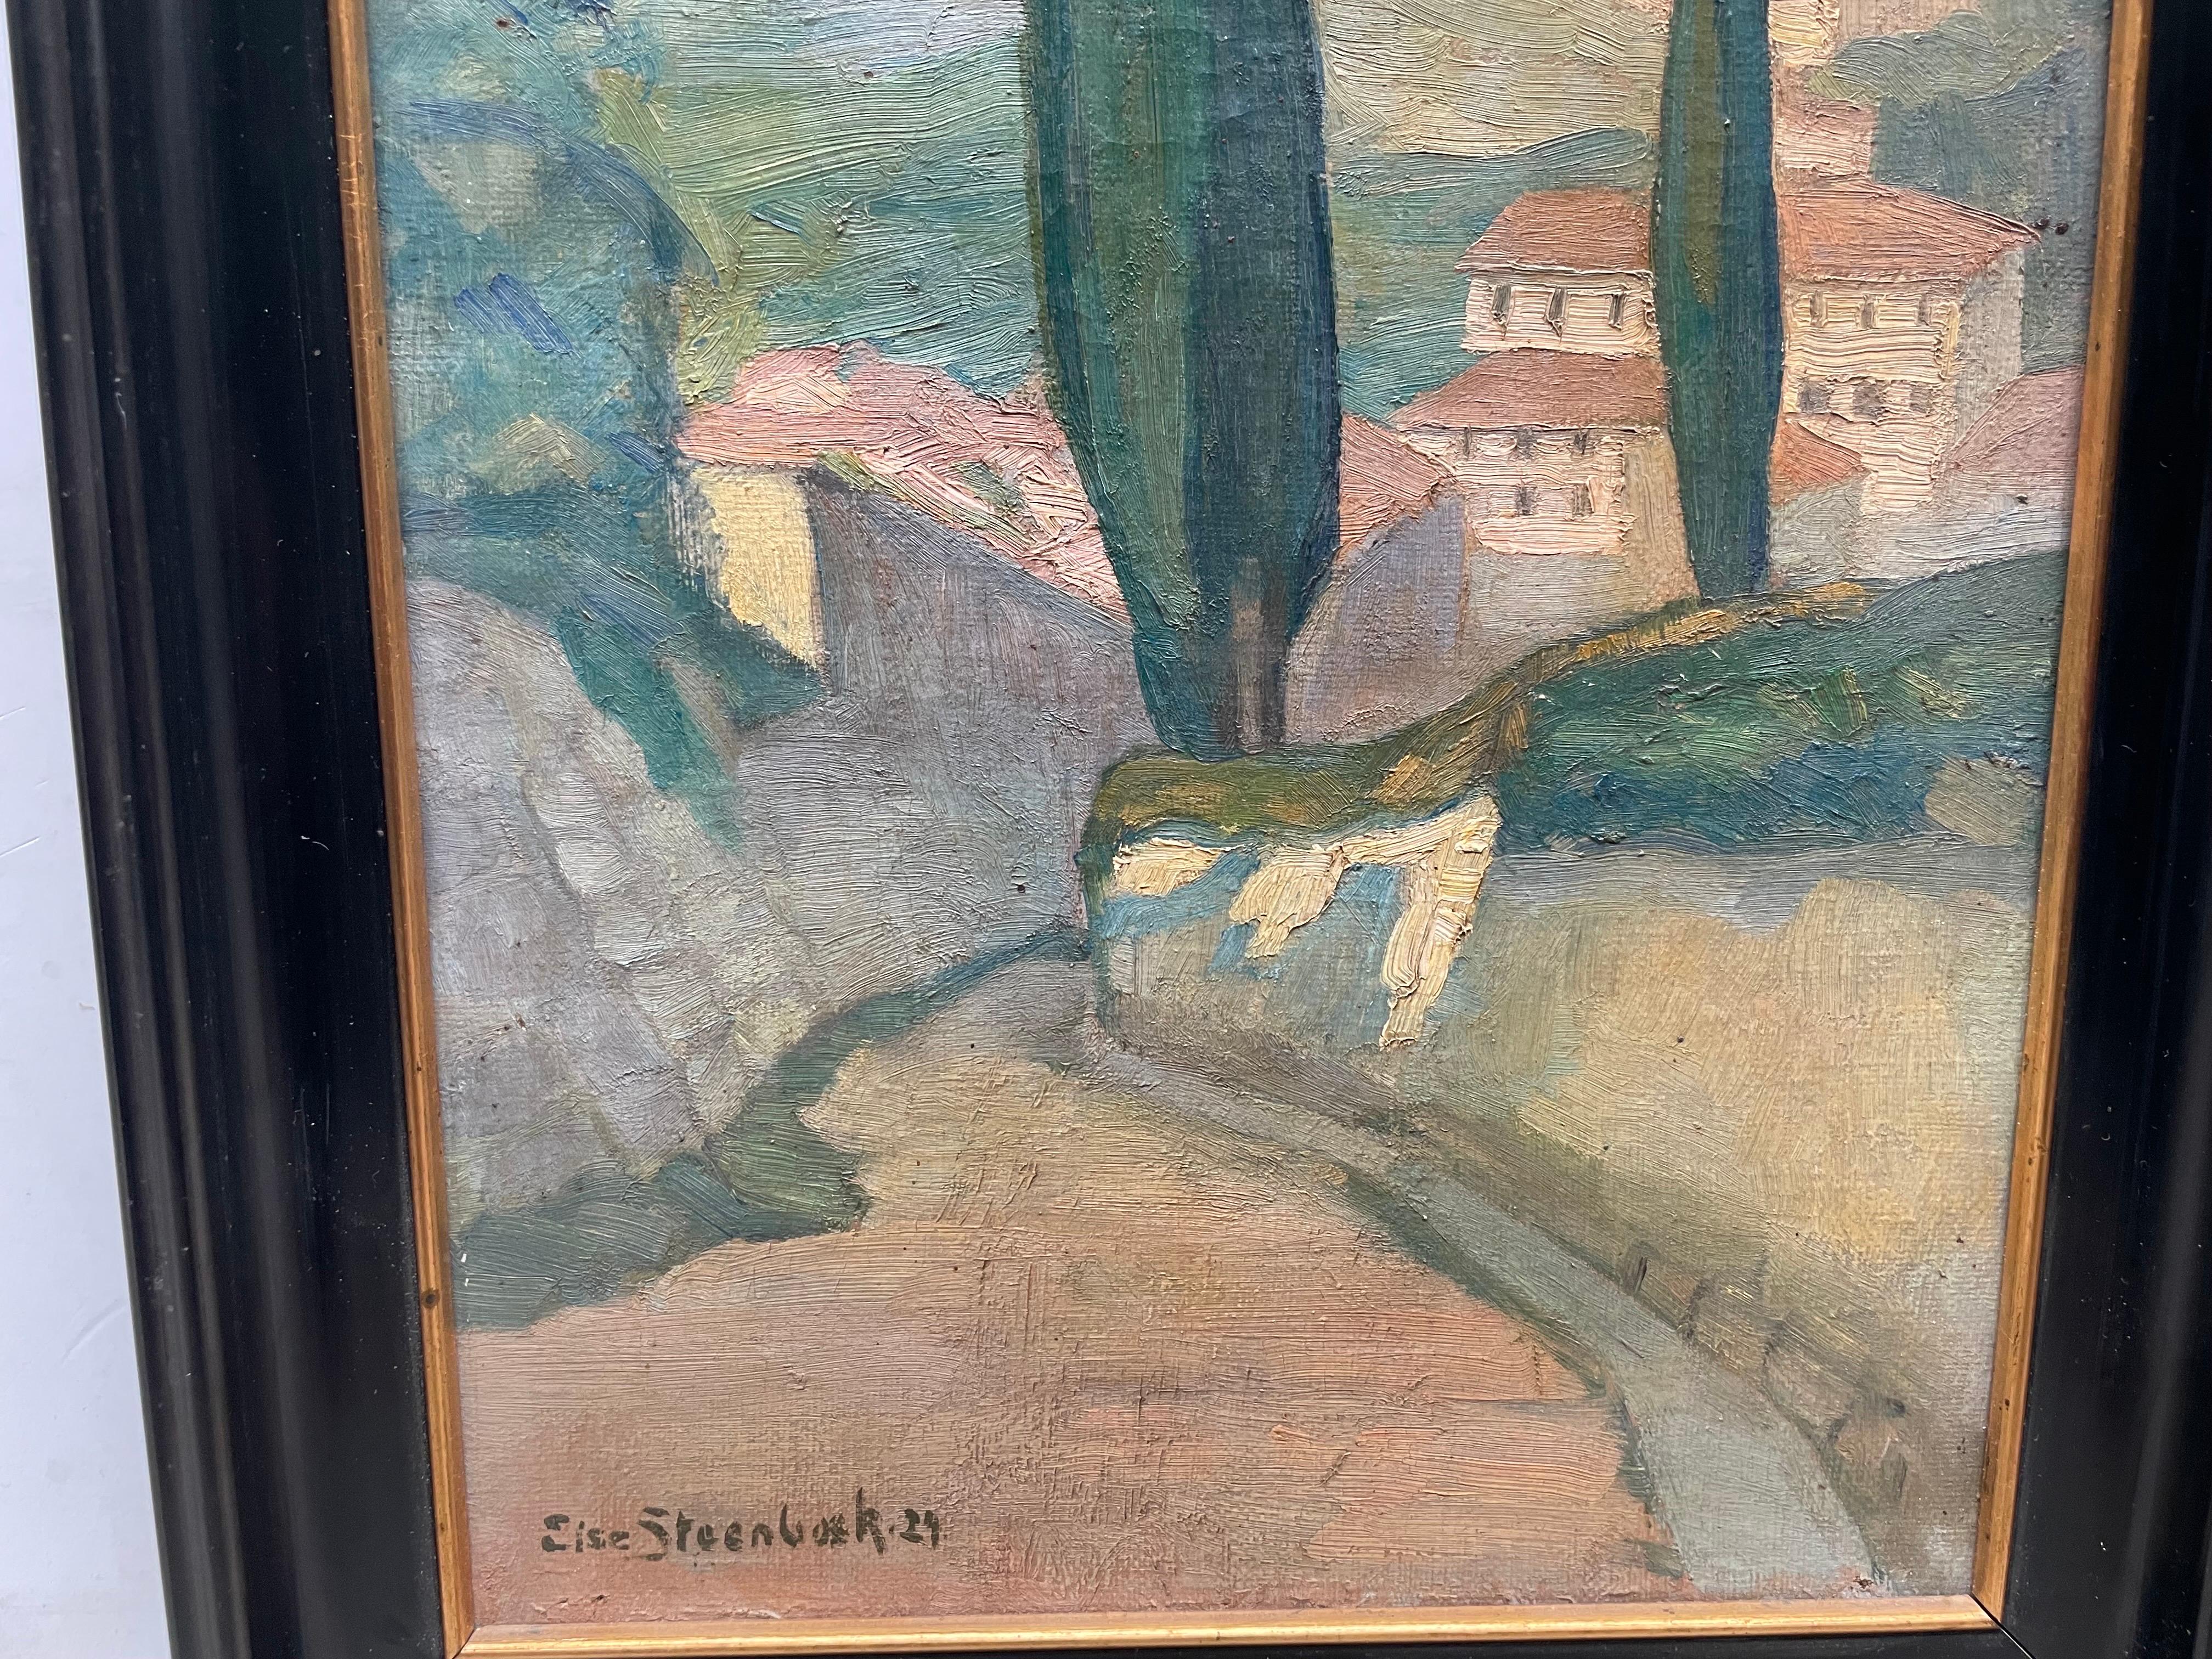 A rediscovered Danish female painter wit this motif from Italy.